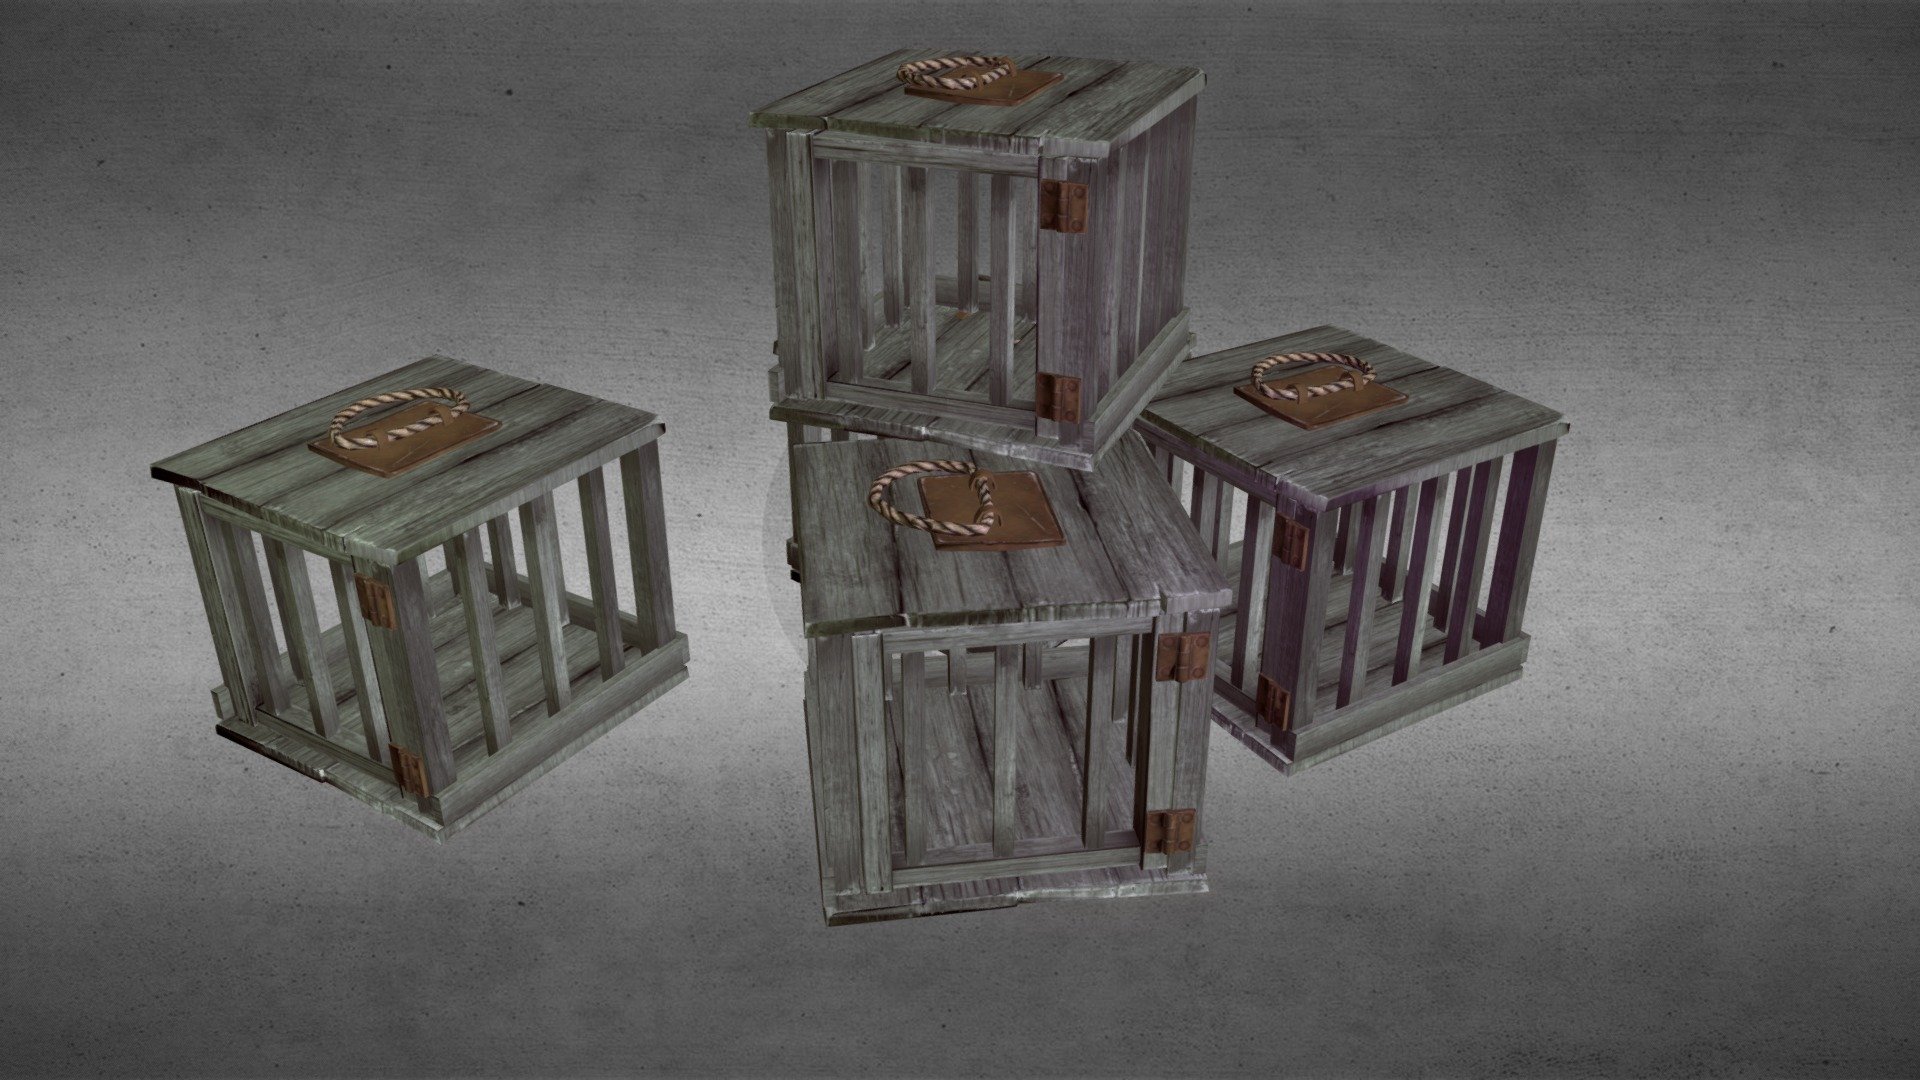 My Contribution To Beyond Skyrim - Cage_Model - 3D model by thelowestanimal 3d model